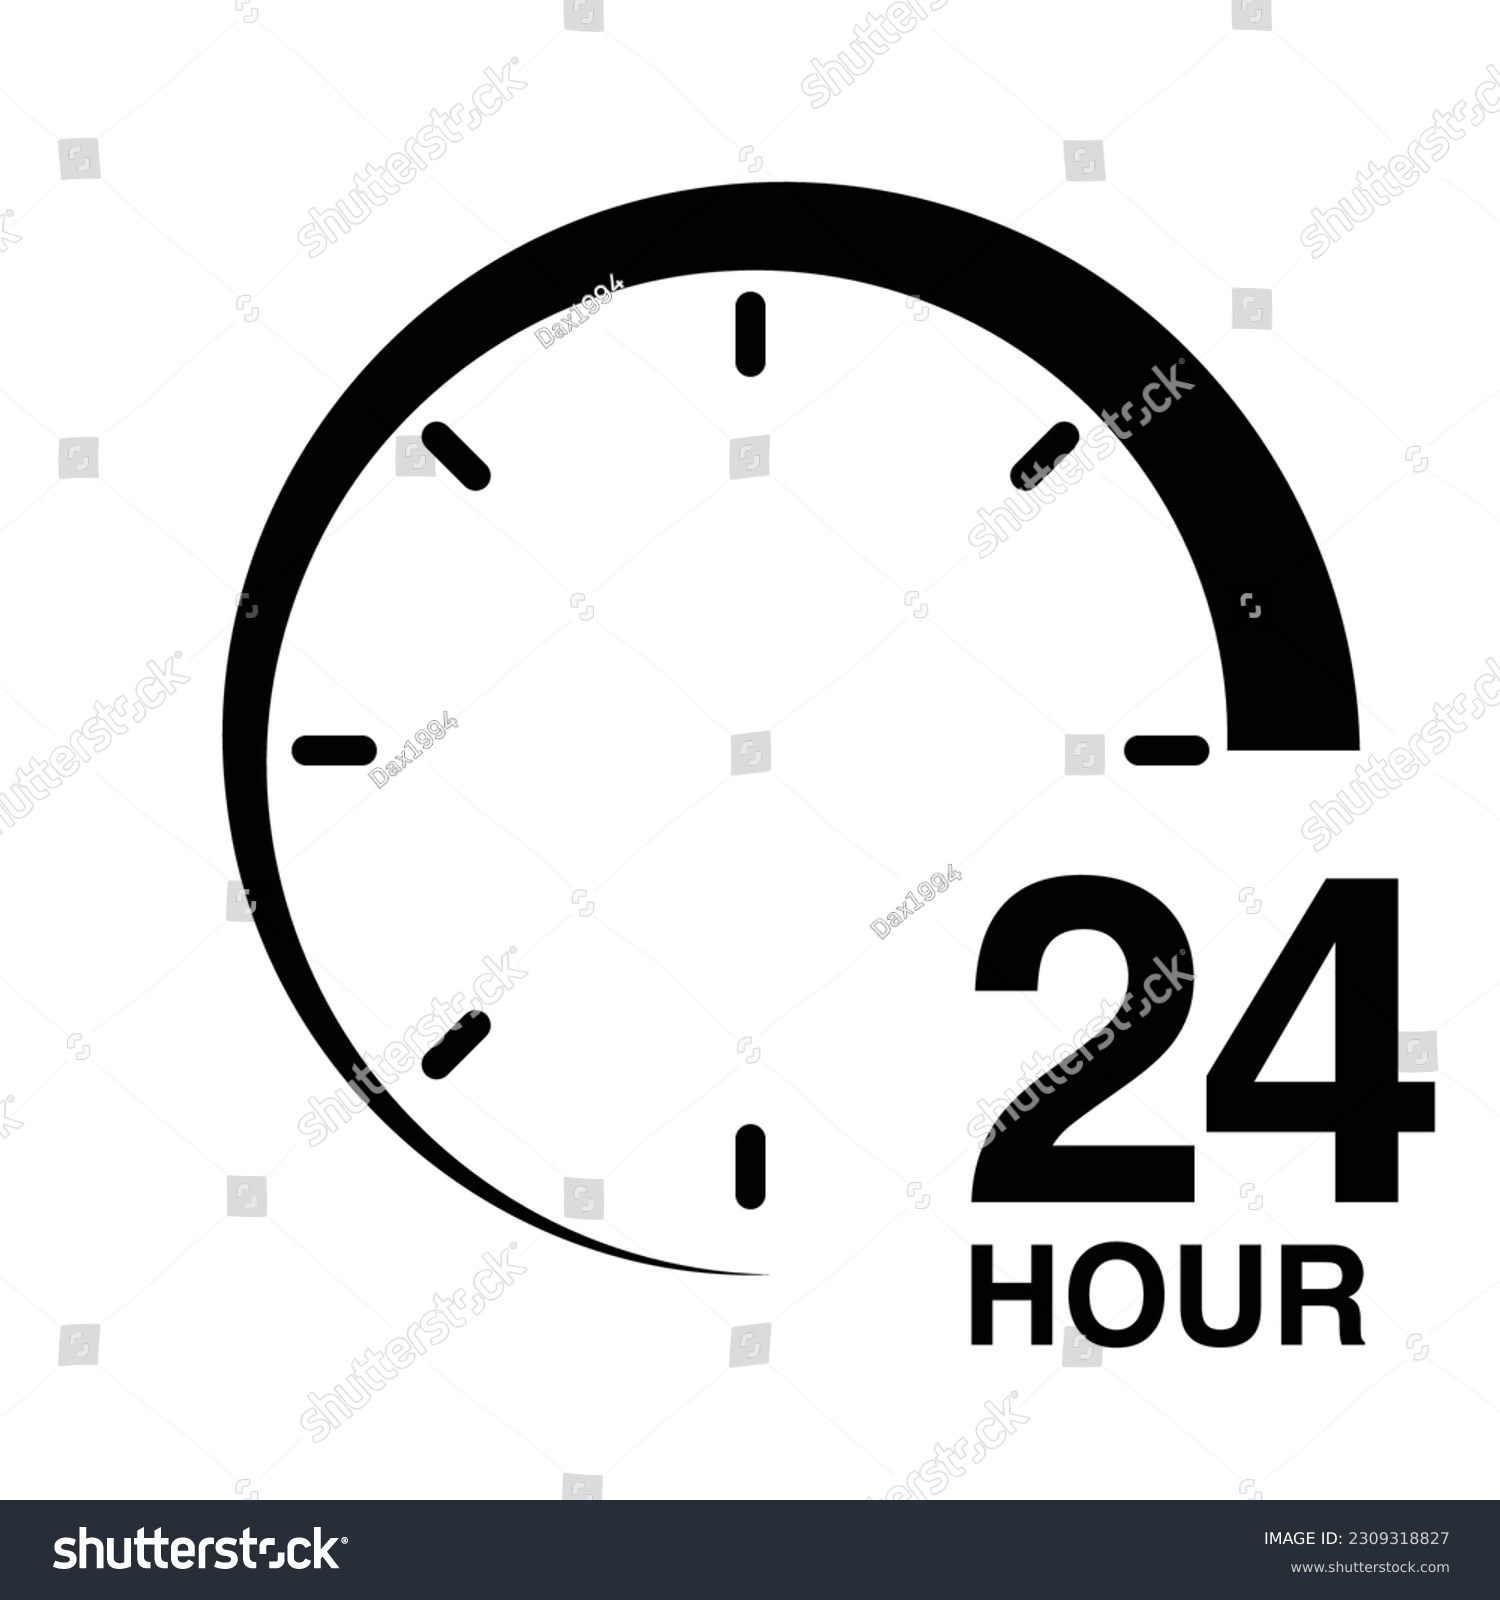 SVG of 24 hour protection clock time sign icon symbol vector illustration isolated on white background svg